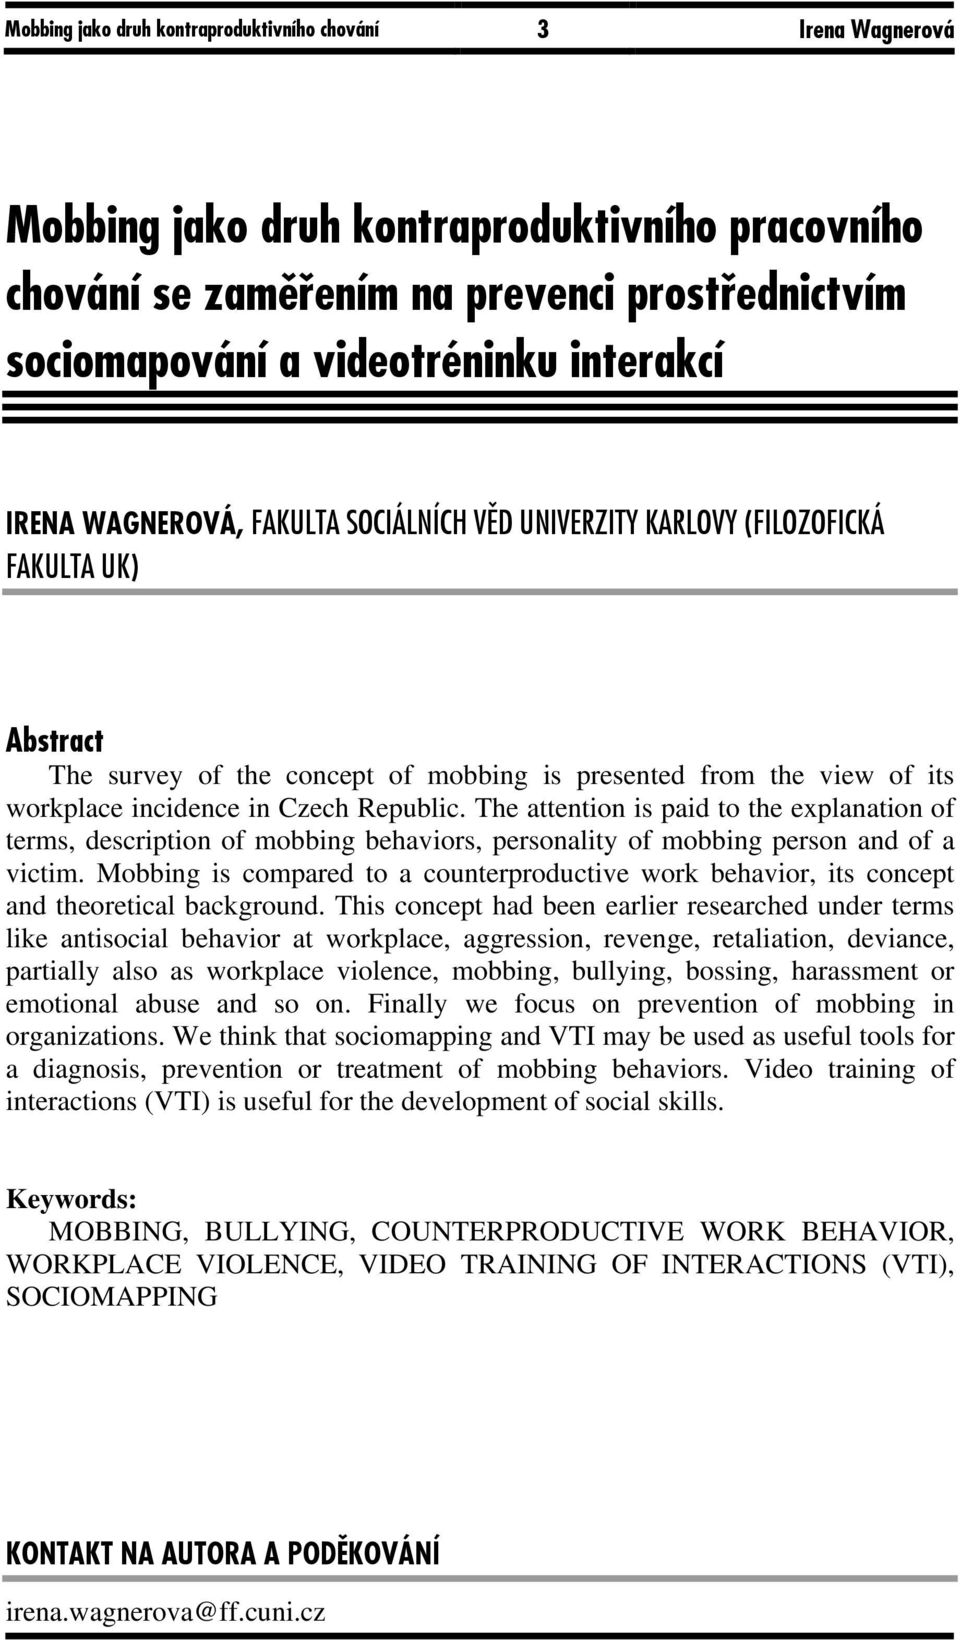 Czech Republic. The attention is paid to the explanation of terms, description of mobbing behaviors, personality of mobbing person and of a victim.